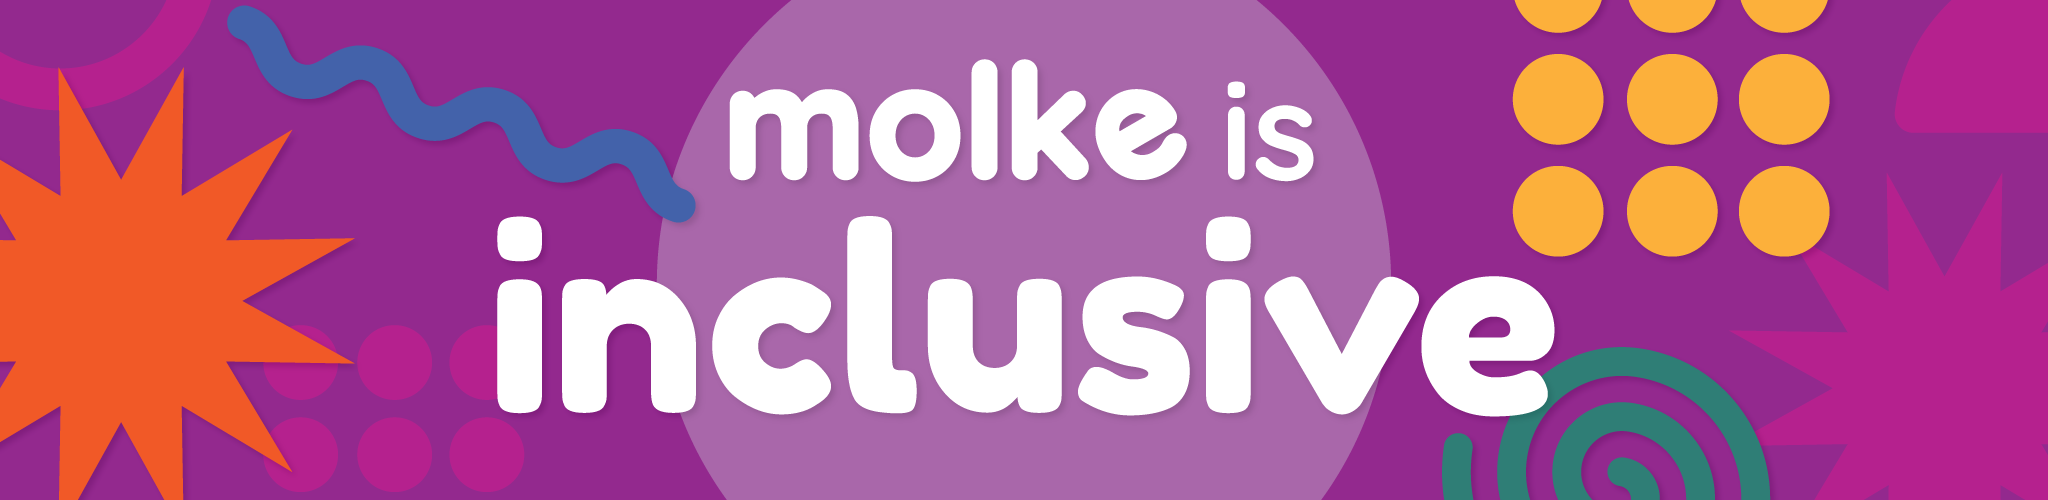 'Molke is inclusive' against a purple patterned background